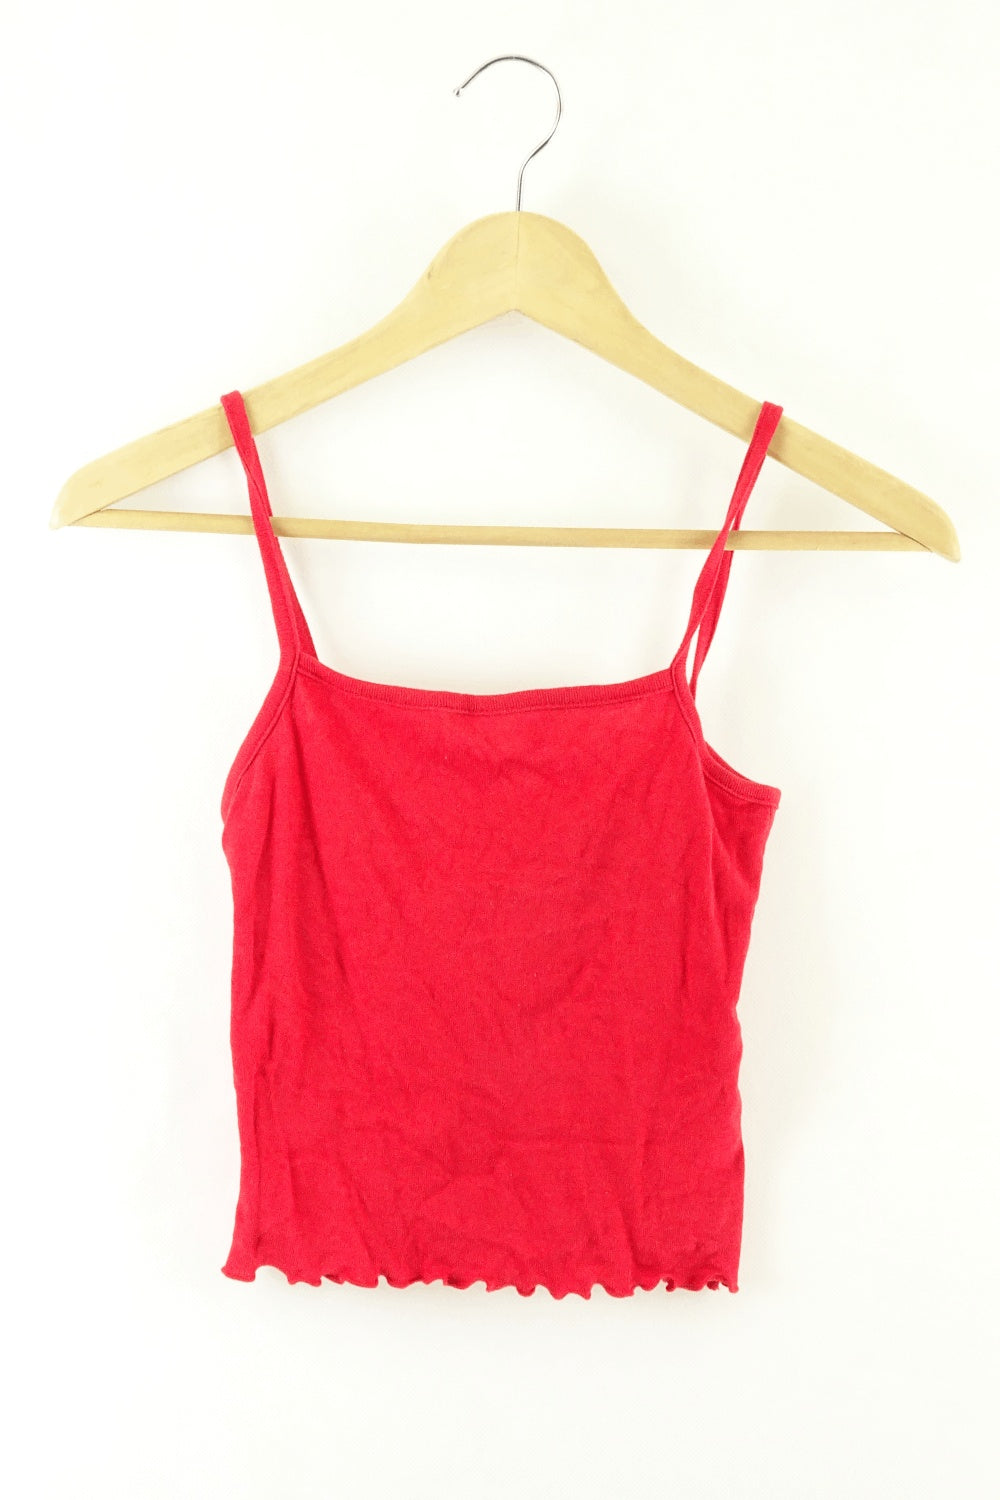 All About Eve Red Cropped Top 8